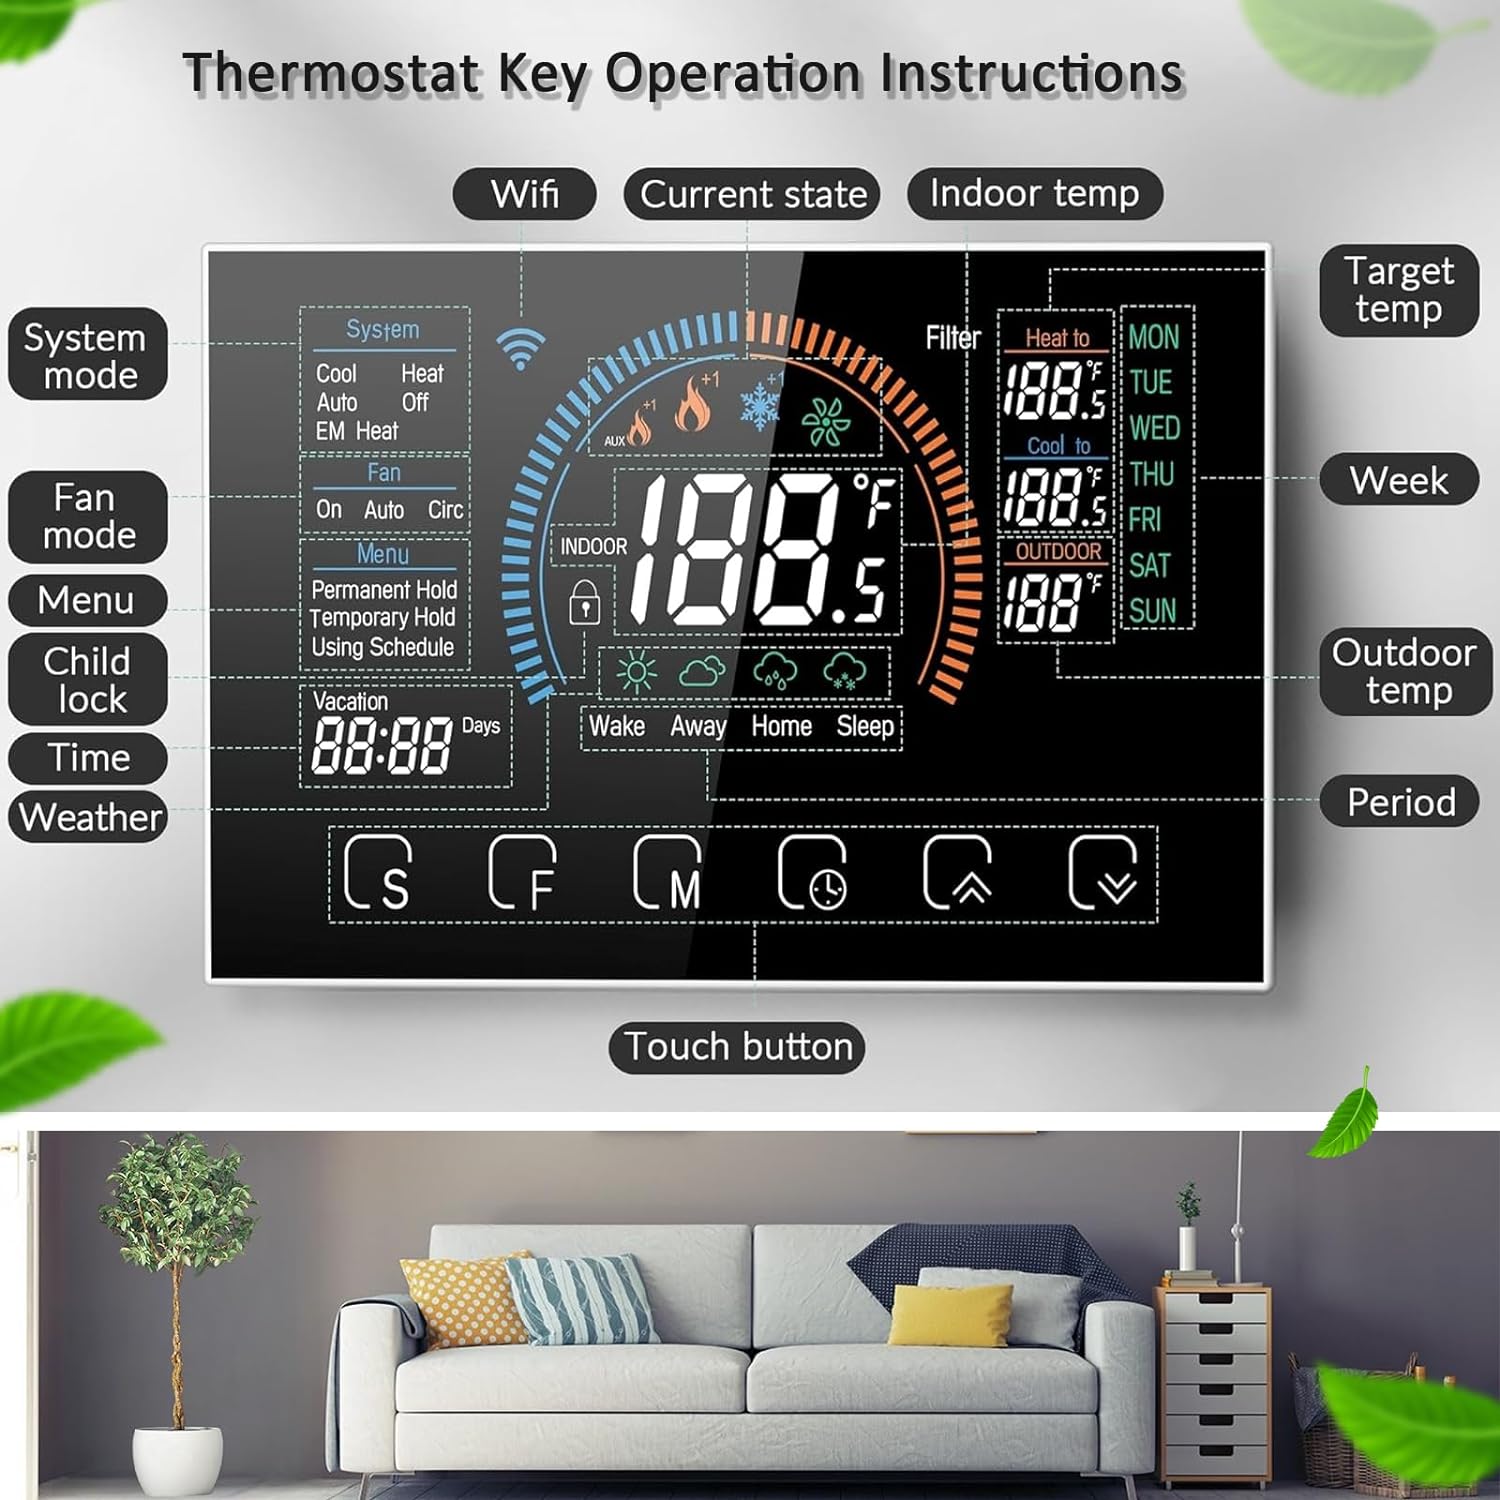 Bestechy Smart Thermostat for Home, WiFi Programmable Digital Thermostat for Air and Ground Energy Heat Pumps, C-Wire Adapter Included, LCD Color Screen, Voice Control, Energy Efficient, Easy DIY